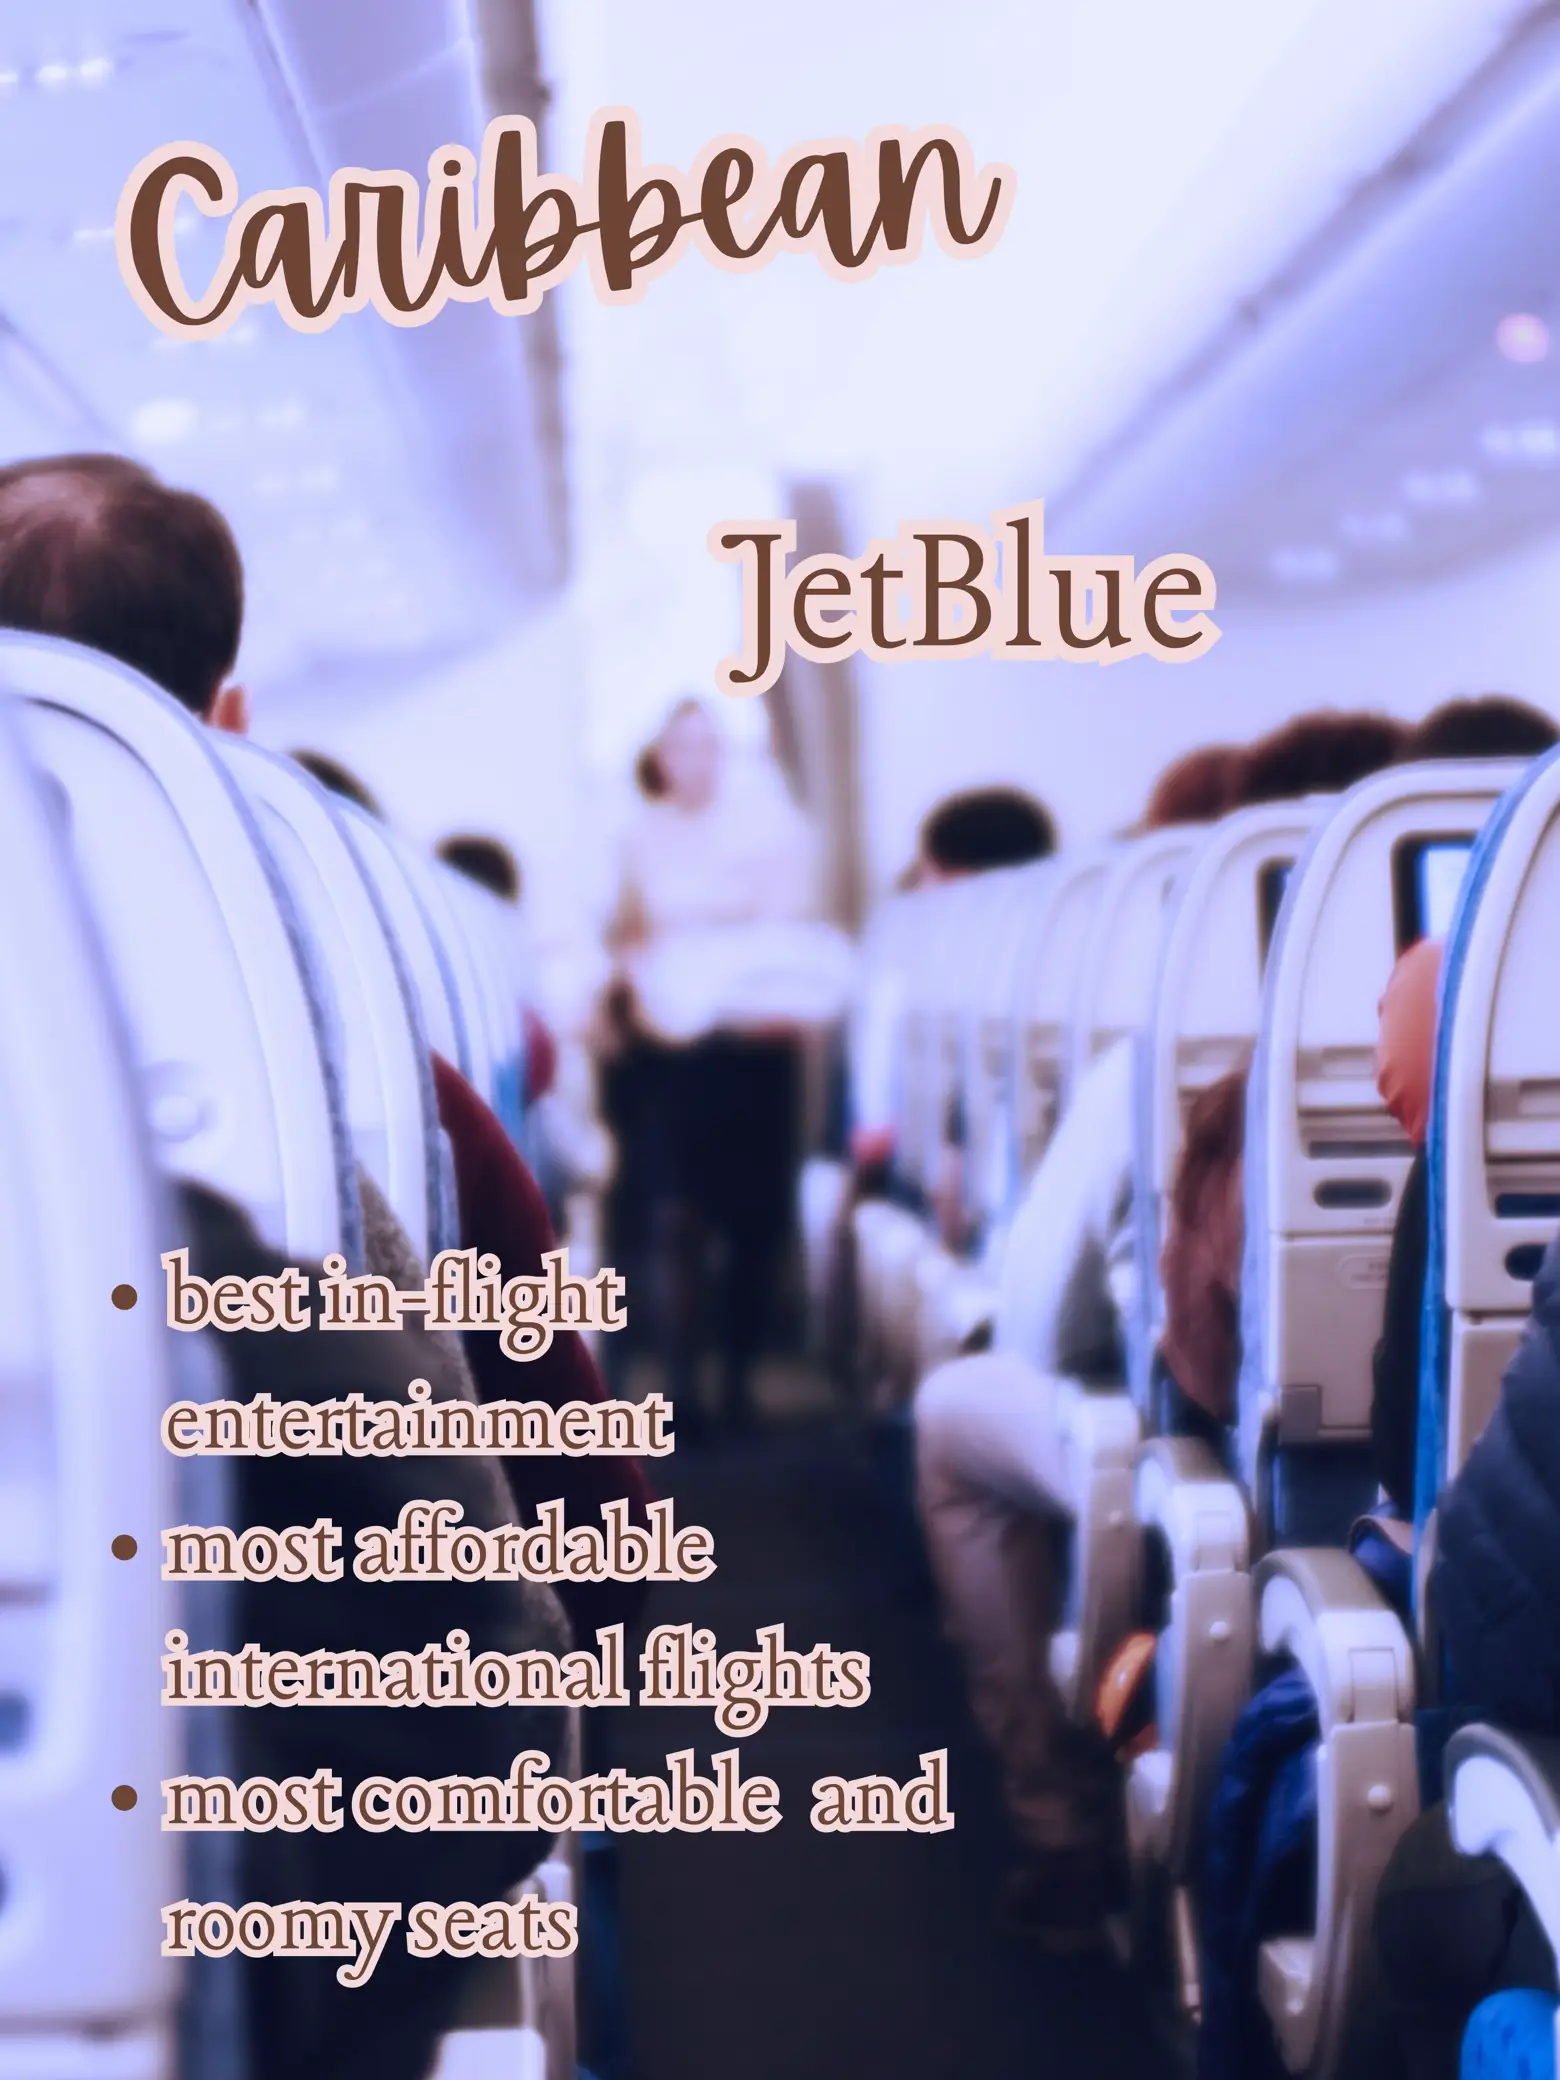  A view of a plane's interior with a description of the best seats.